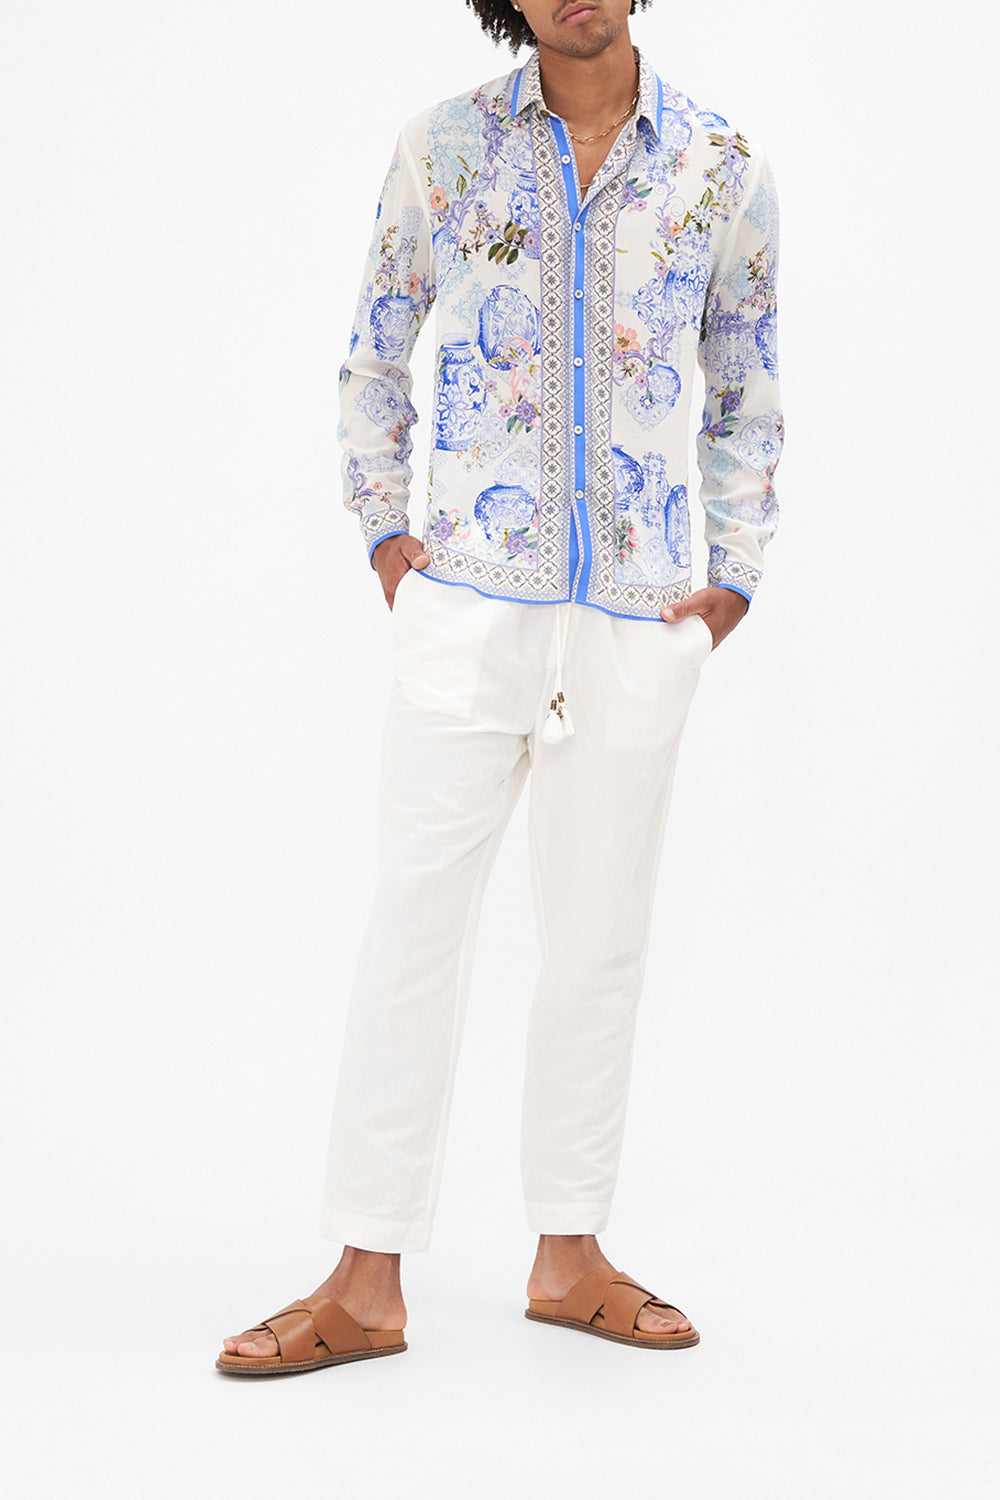 Front view of model wearing HOTEL FRANKS BY CAMILLA white and blue floral mens shirt in Paint Me Positano print